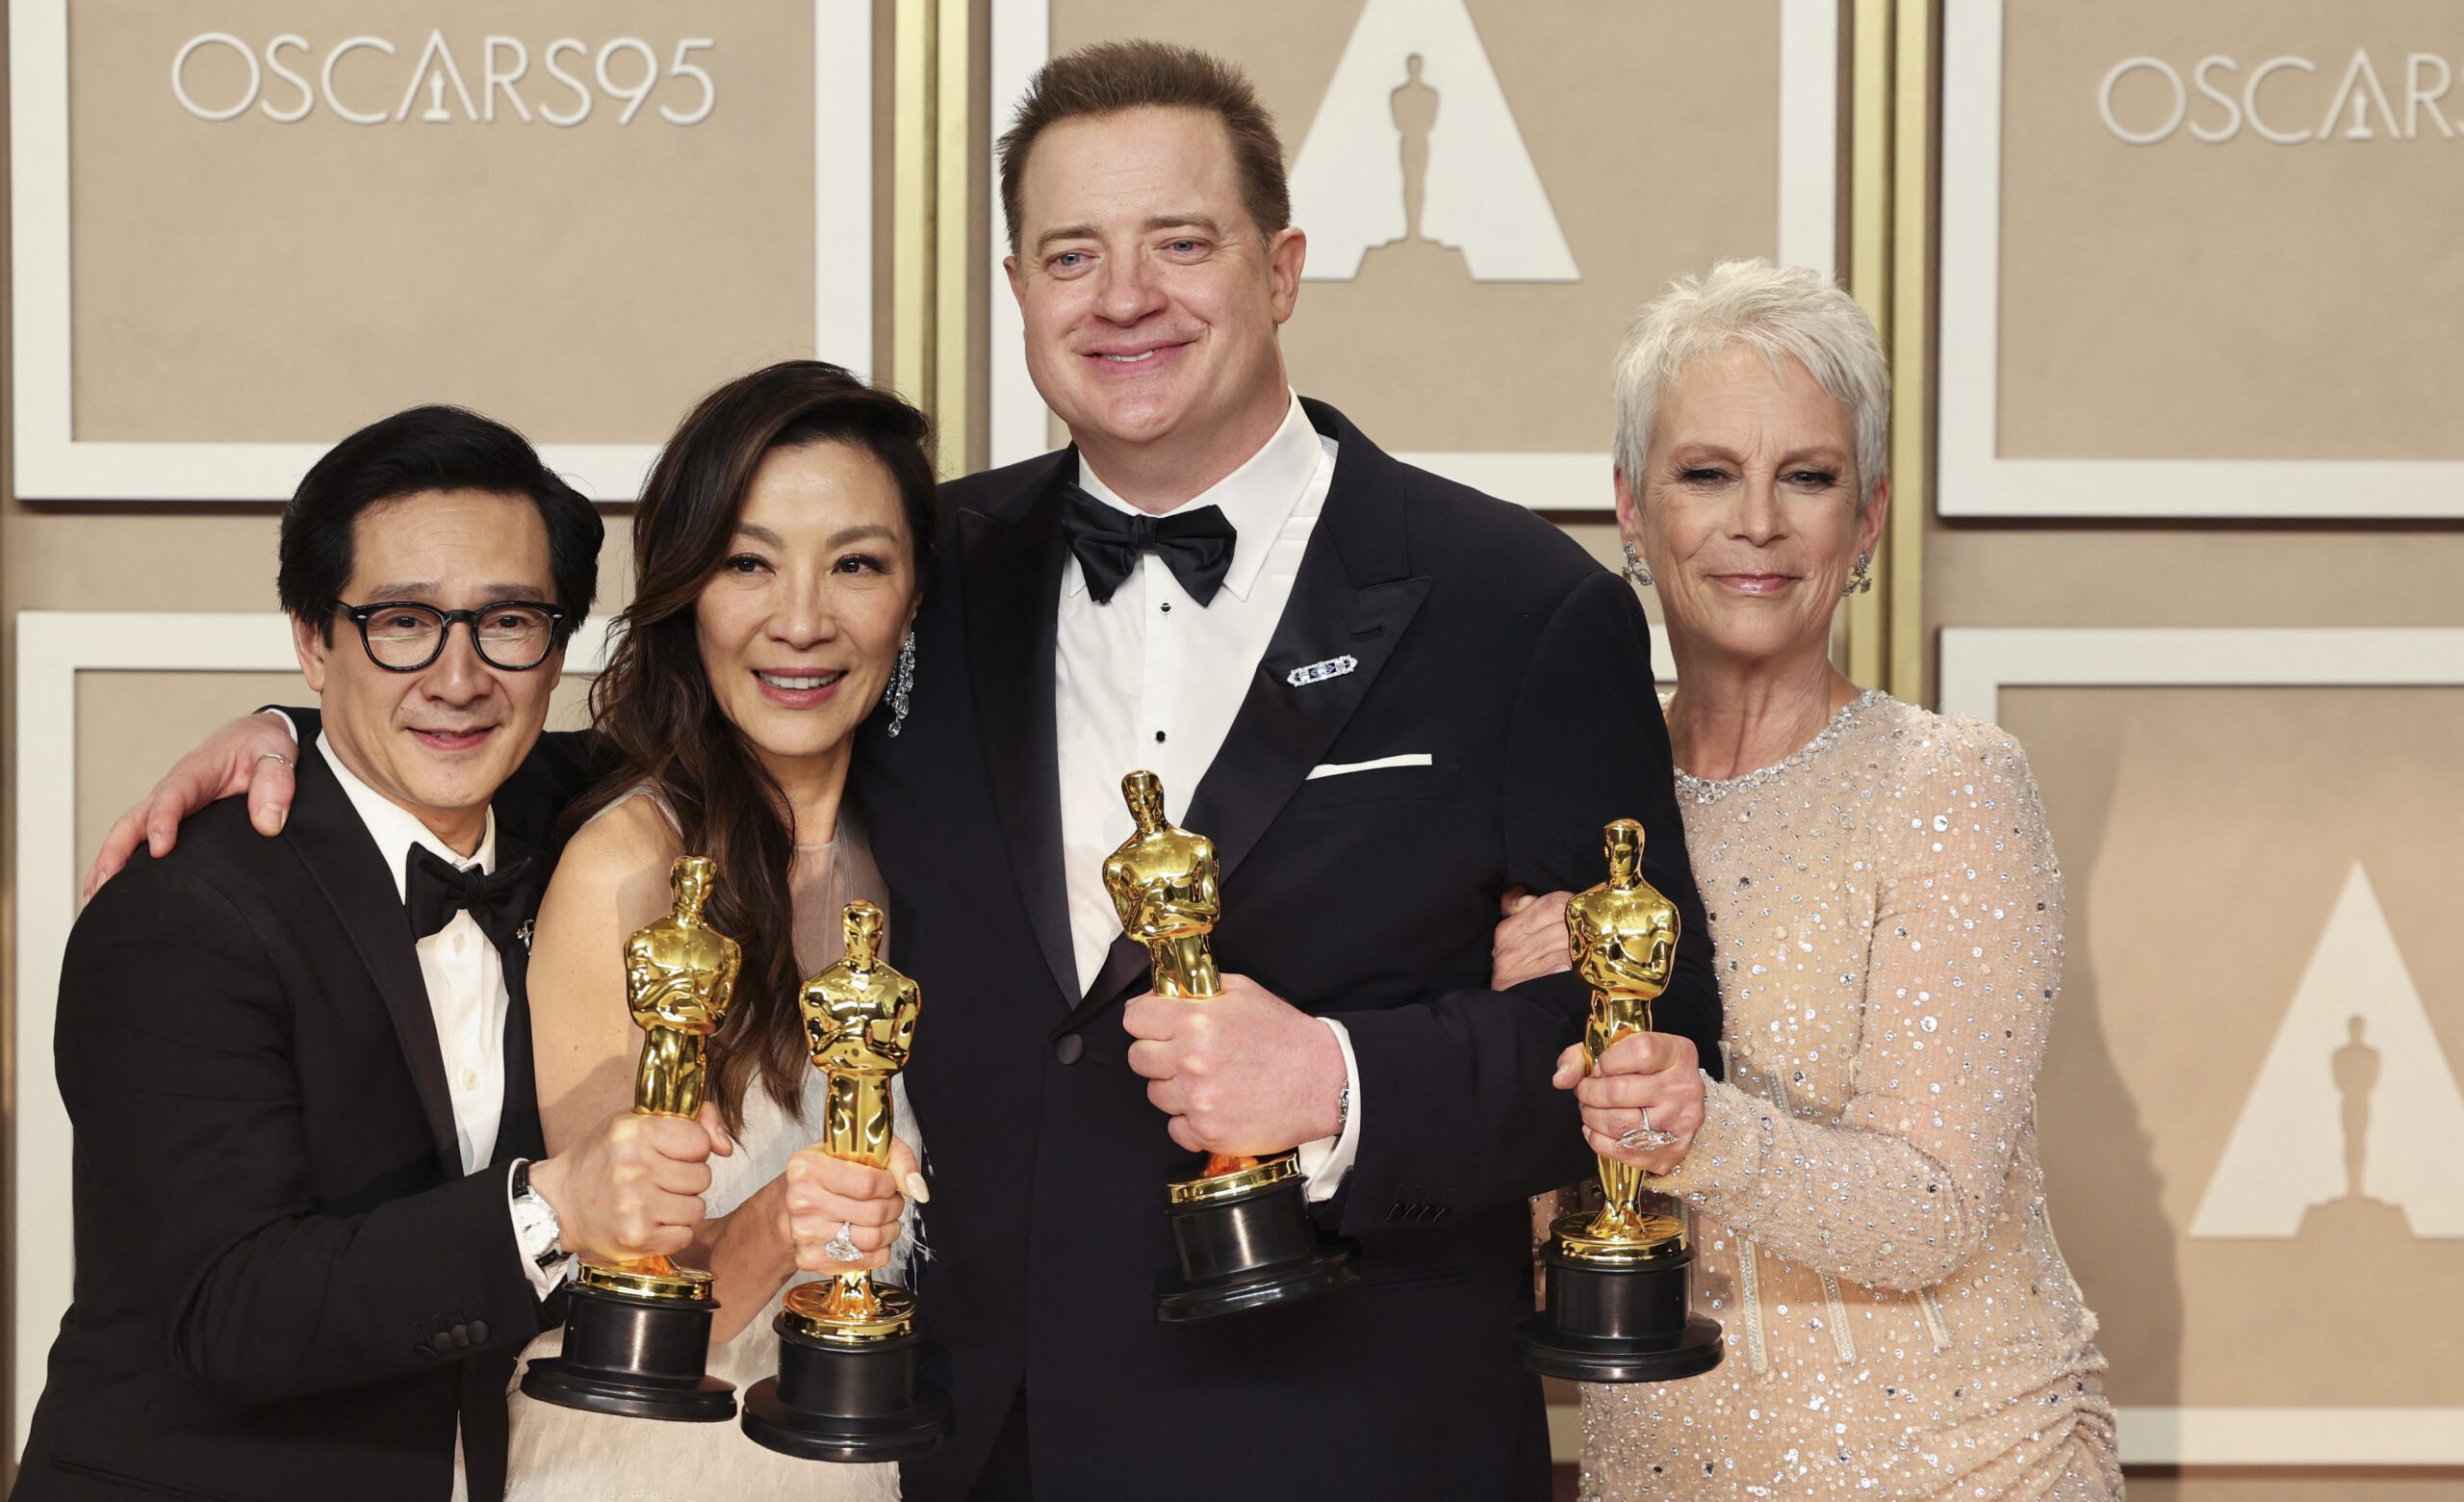 Studio A24 captures Oscar spotlight with big wins for best picture, acting